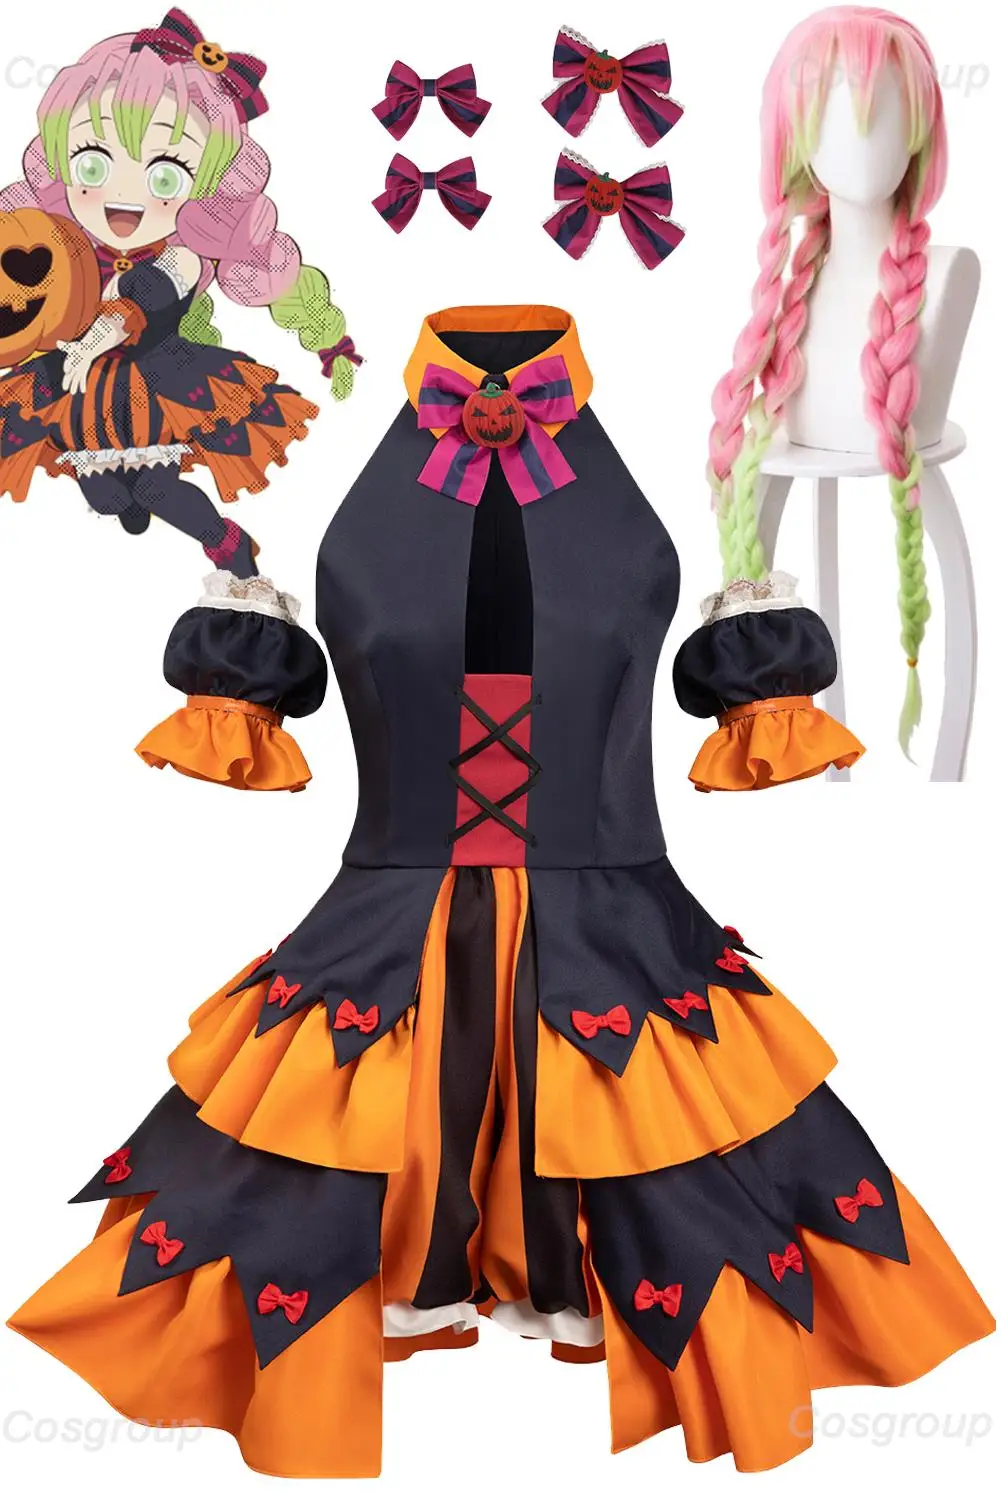 

Halloween Kanroji Mitsuri Cosplay Wigs Women Costume Anime Demon Slayer Roleplay Fantasia Outfits Fancy Dress Up Party Role Play